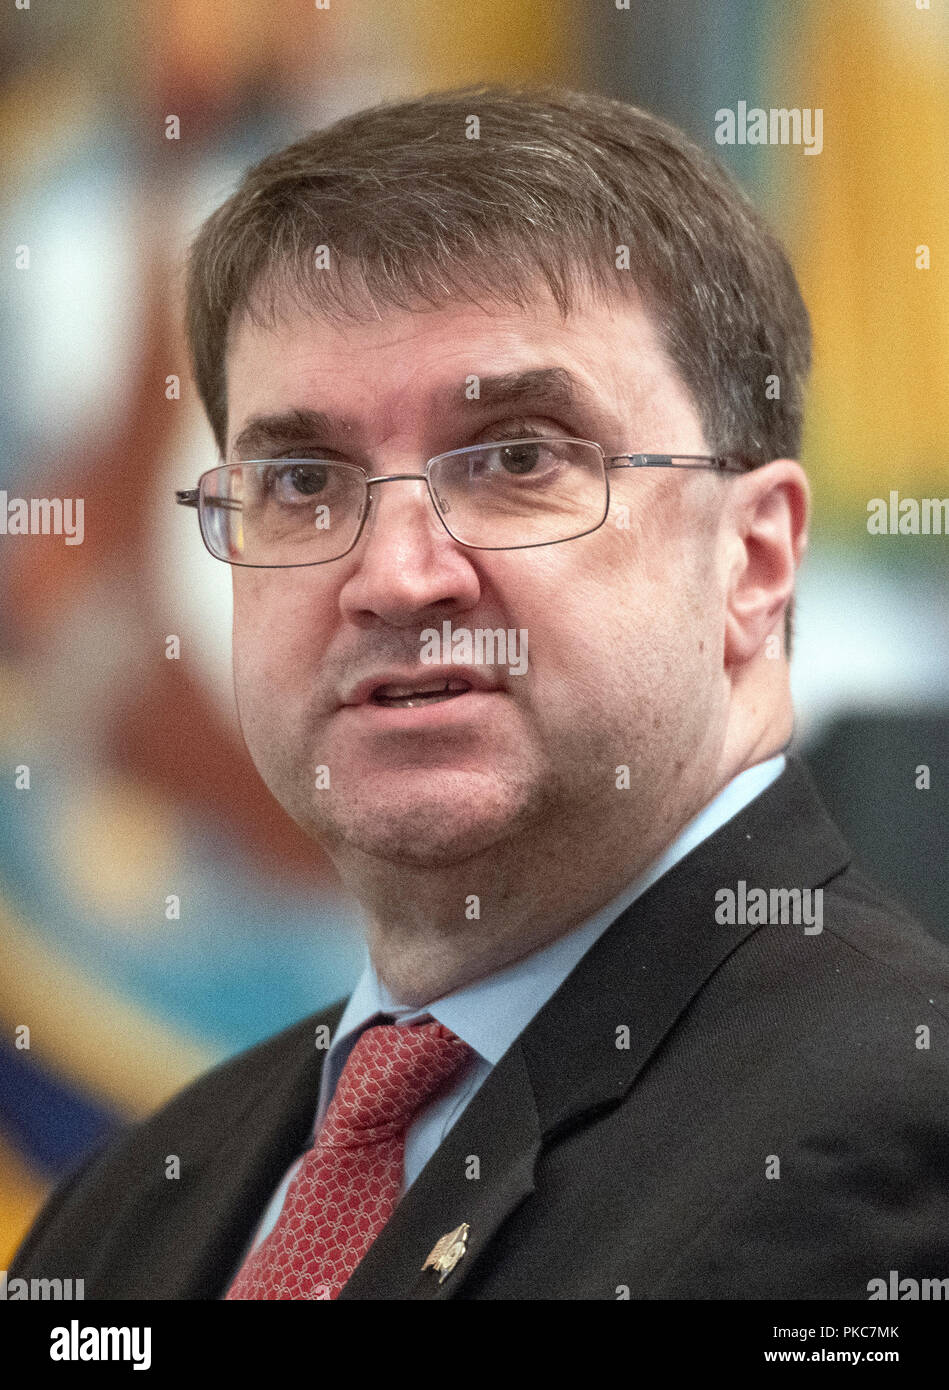 Washington, United States Of America. 12th Sep, 2018. United States Secretary of Veterans Affairs Robert Wilkie, prior to the arrival of US President Donald J. Trump who will make remarks at the Congressional Medal of Honor Society Reception in the East Room of the White House in Washington, DC on Wednesday, September 12, 2018. Credit: Ron Sachs/CNP | usage worldwide Credit: dpa/Alamy Live News Stock Photo